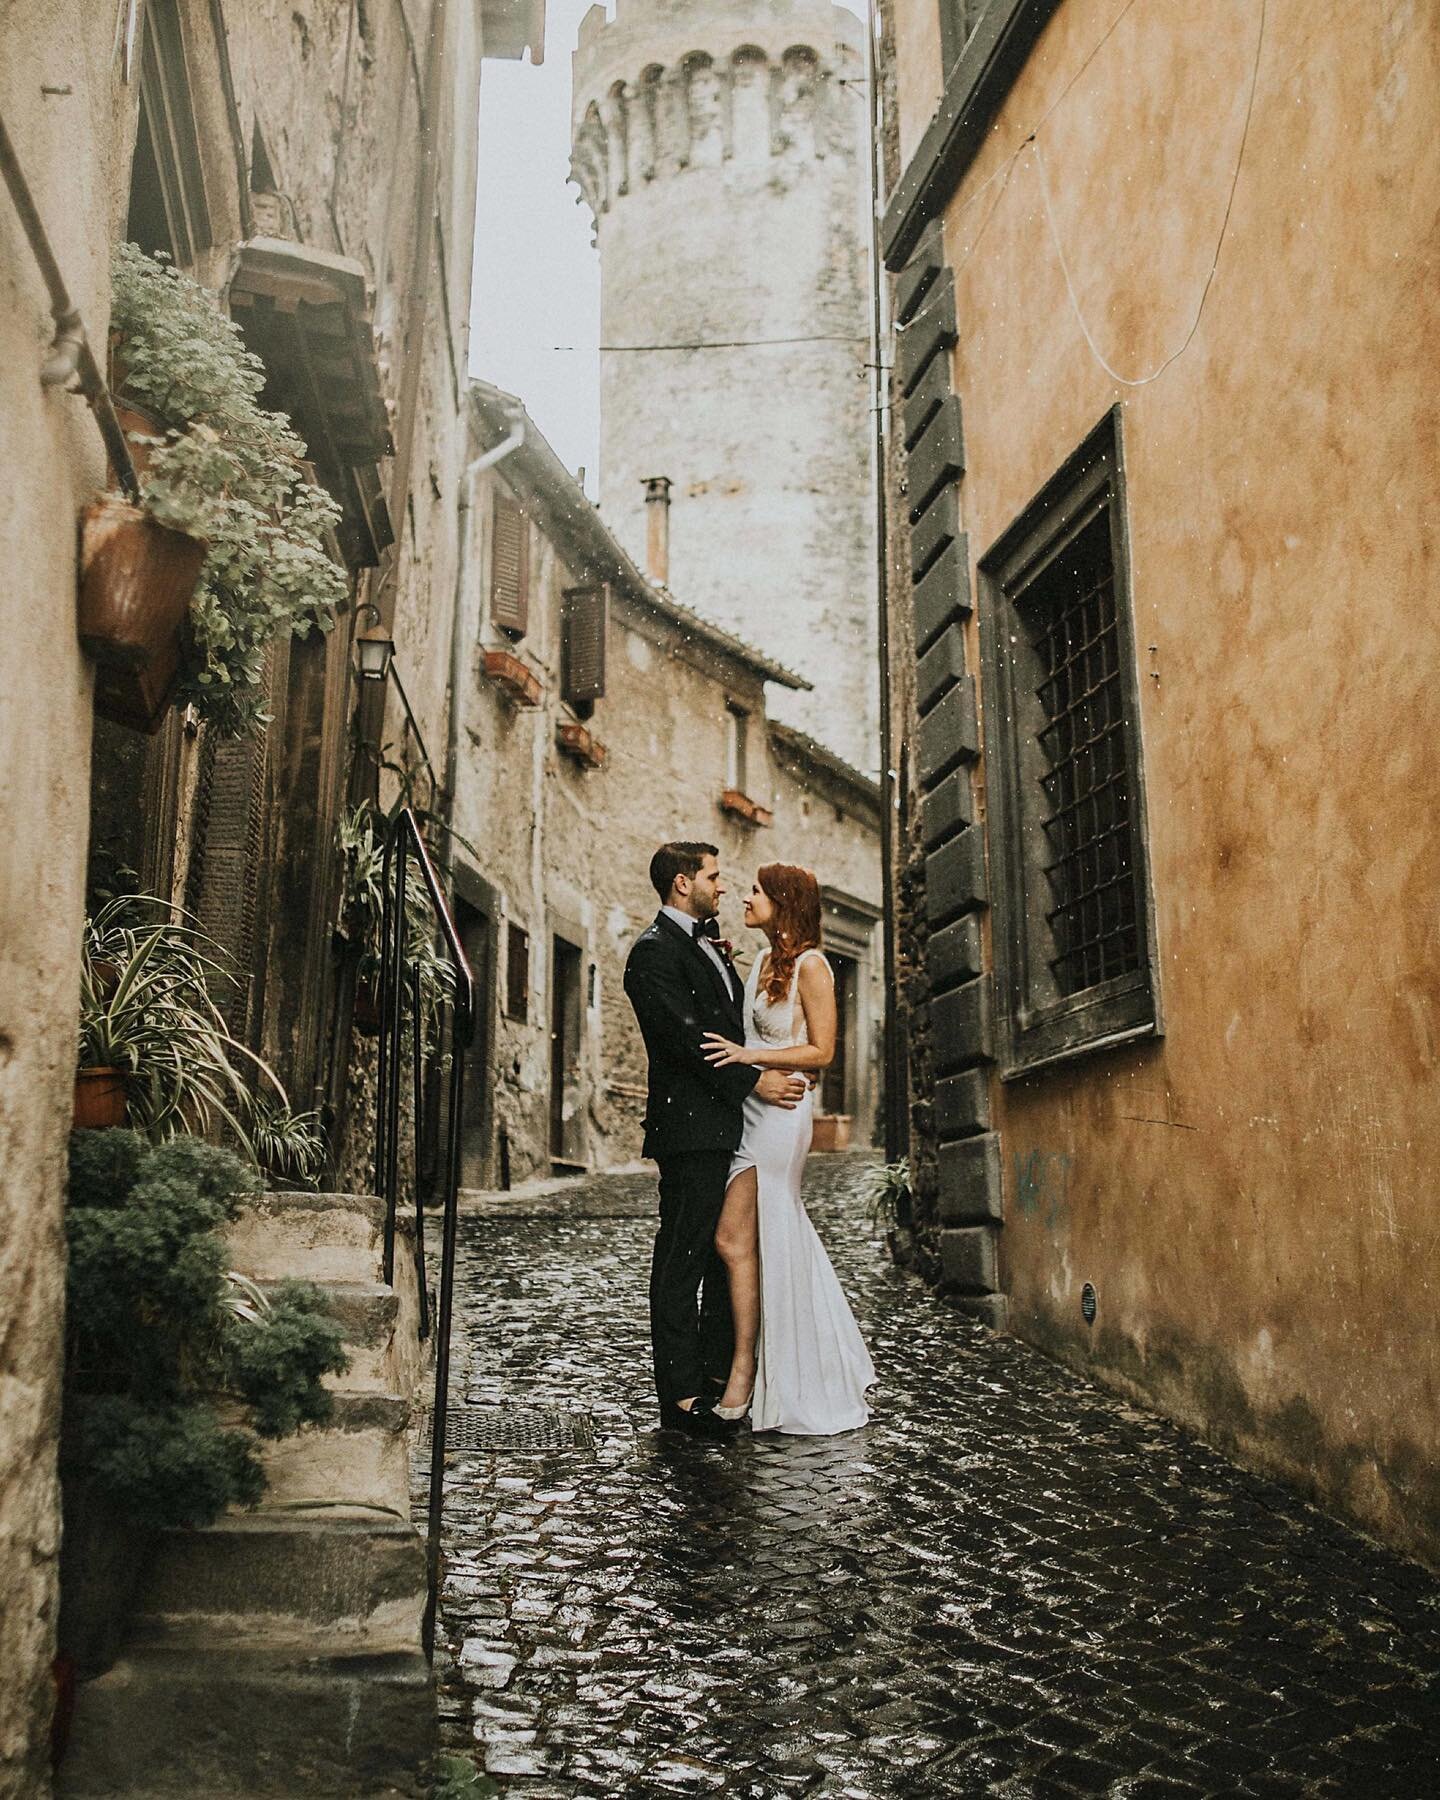 One of those days in Italy where everything just falls into place🖤✌🏾

#italywedding #braccianowedding #bracciano #romewedding  #italyweddingphotographer #florencewedding #lakecomowedding #lakecomoweddingphotographer #bridetobe2023 #bridetobe2024 #d